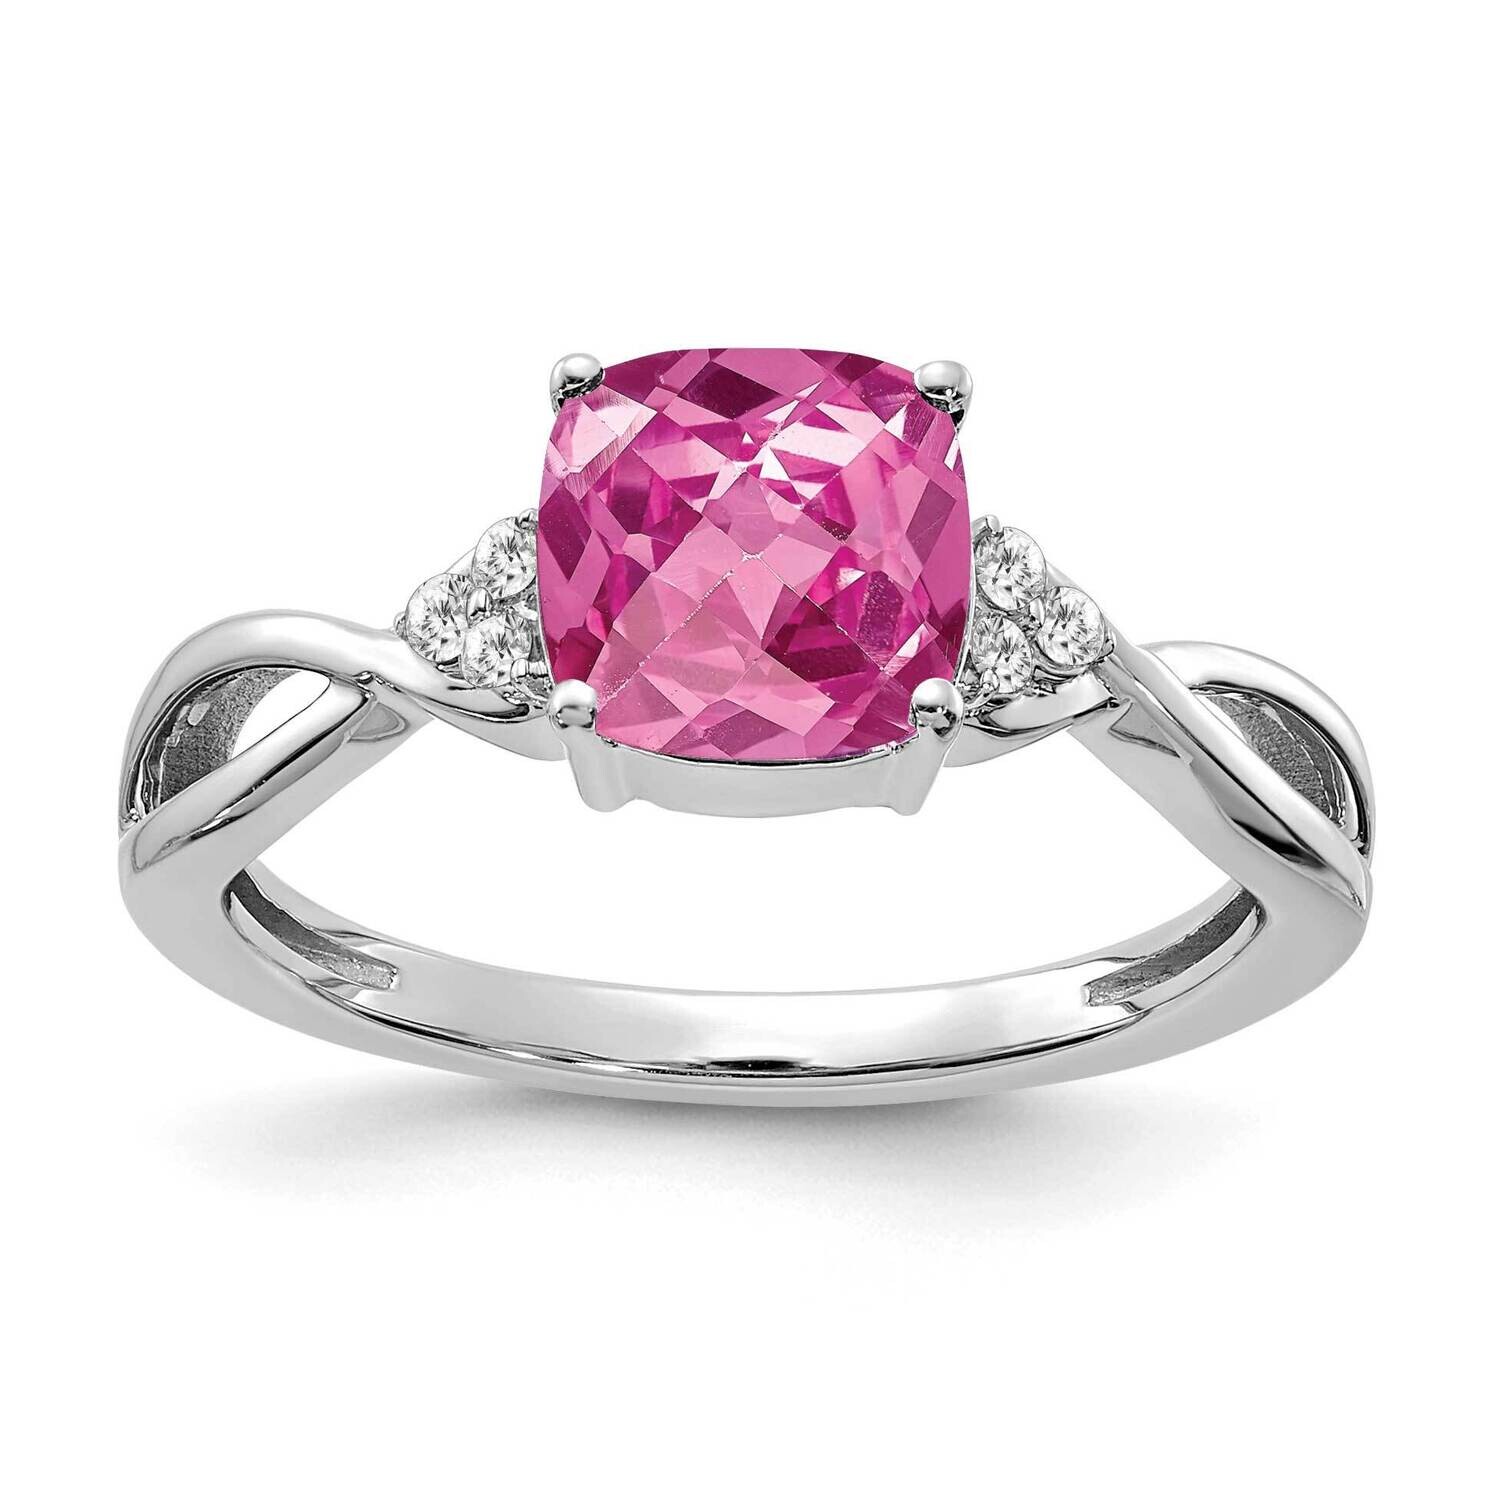 Checkerboard Created Pink Sapphire Diamond Ring 14k White Gold RM4393-CPS-006-WA